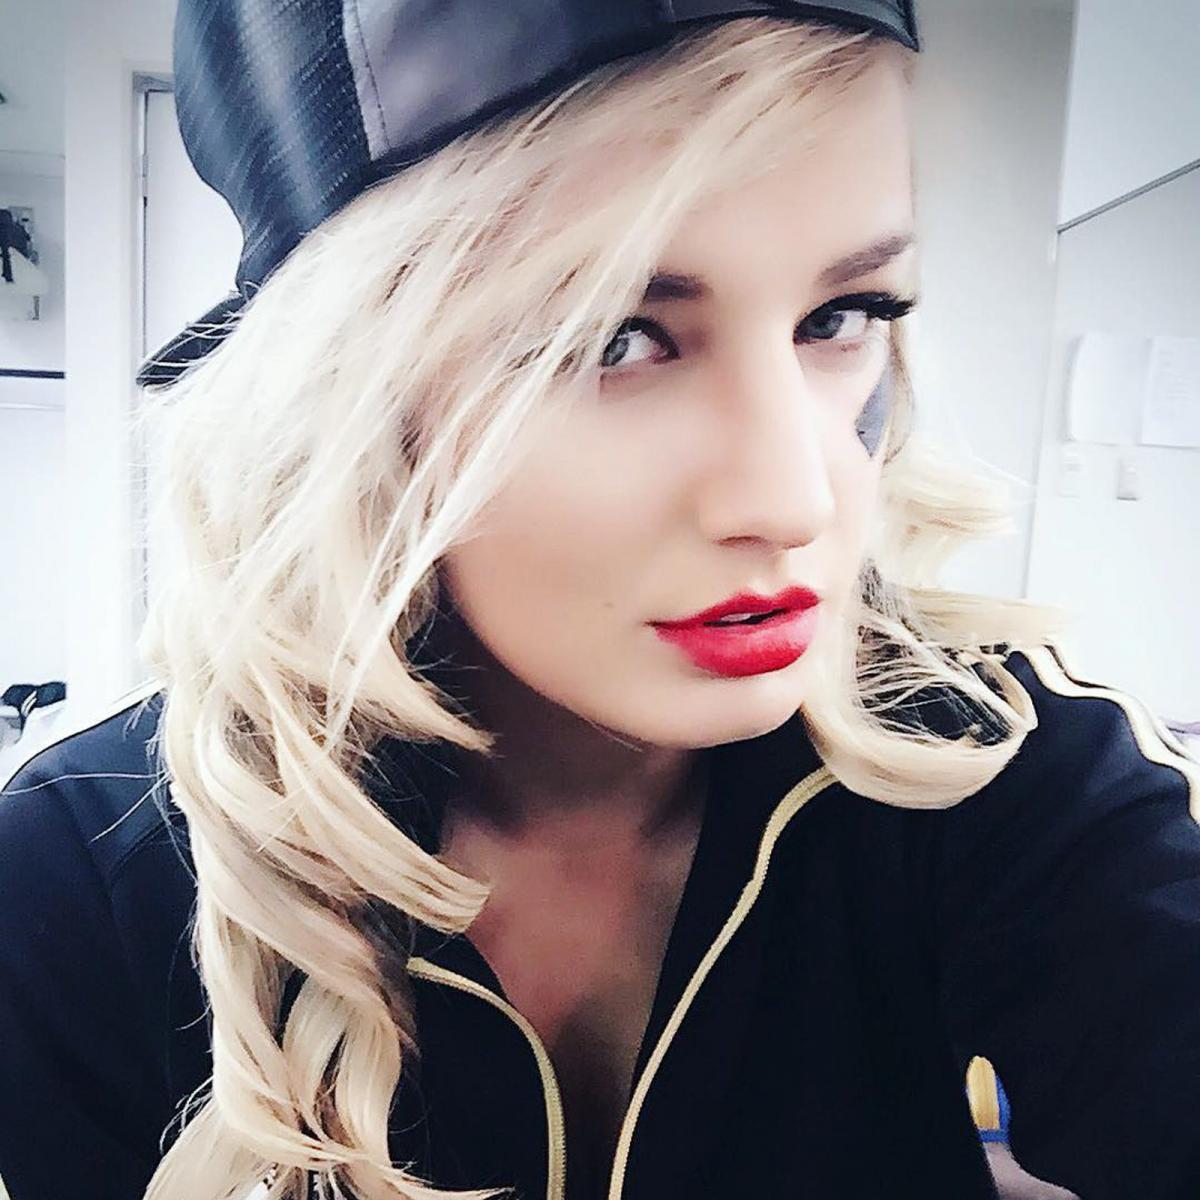 The best of Toni Storm on Instagram